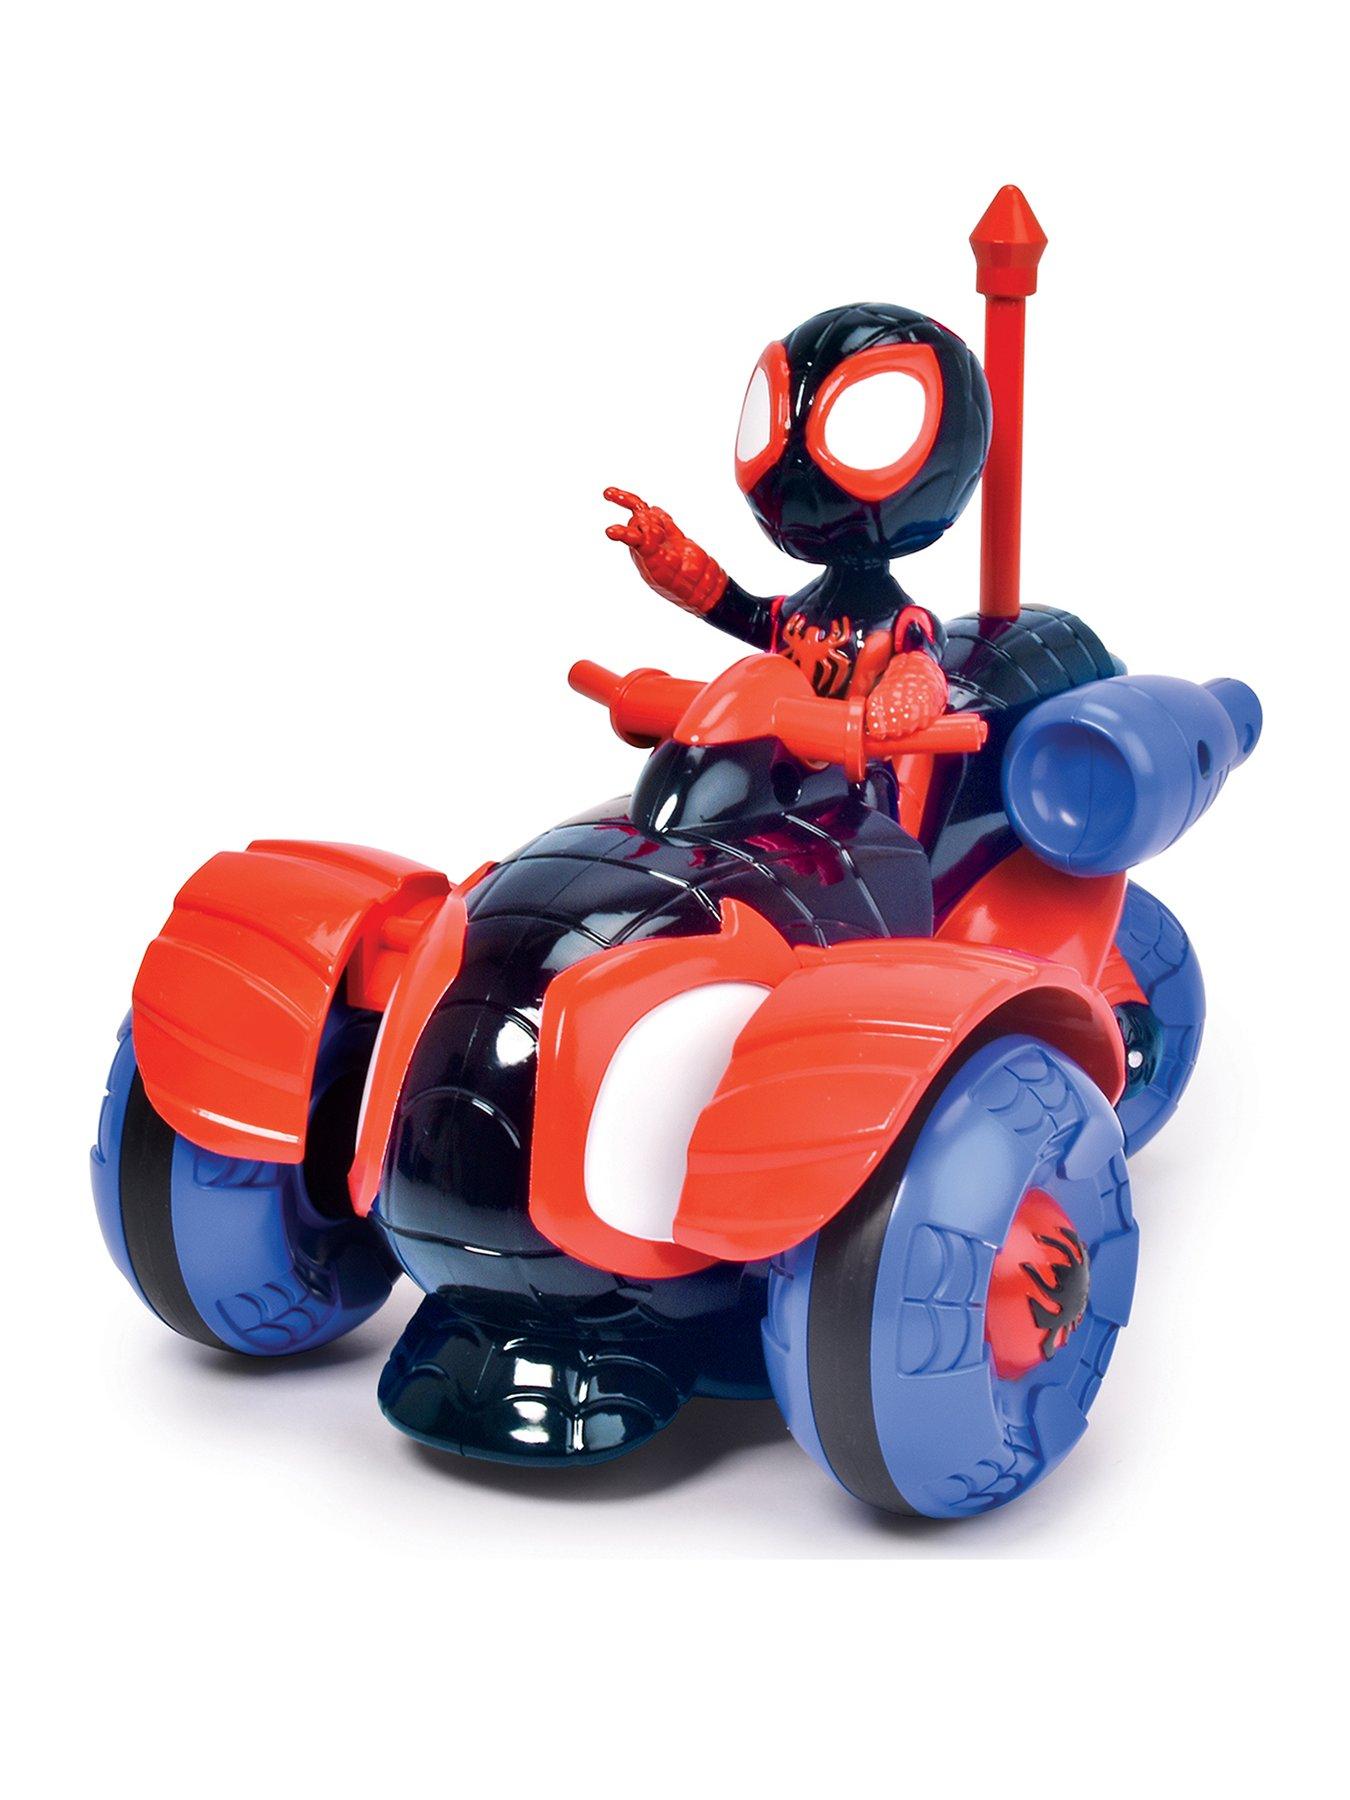 Spidey And His Amazing Friends Spider Crawl-r 2-in-1 Deluxe Headquarters  Playset : Target